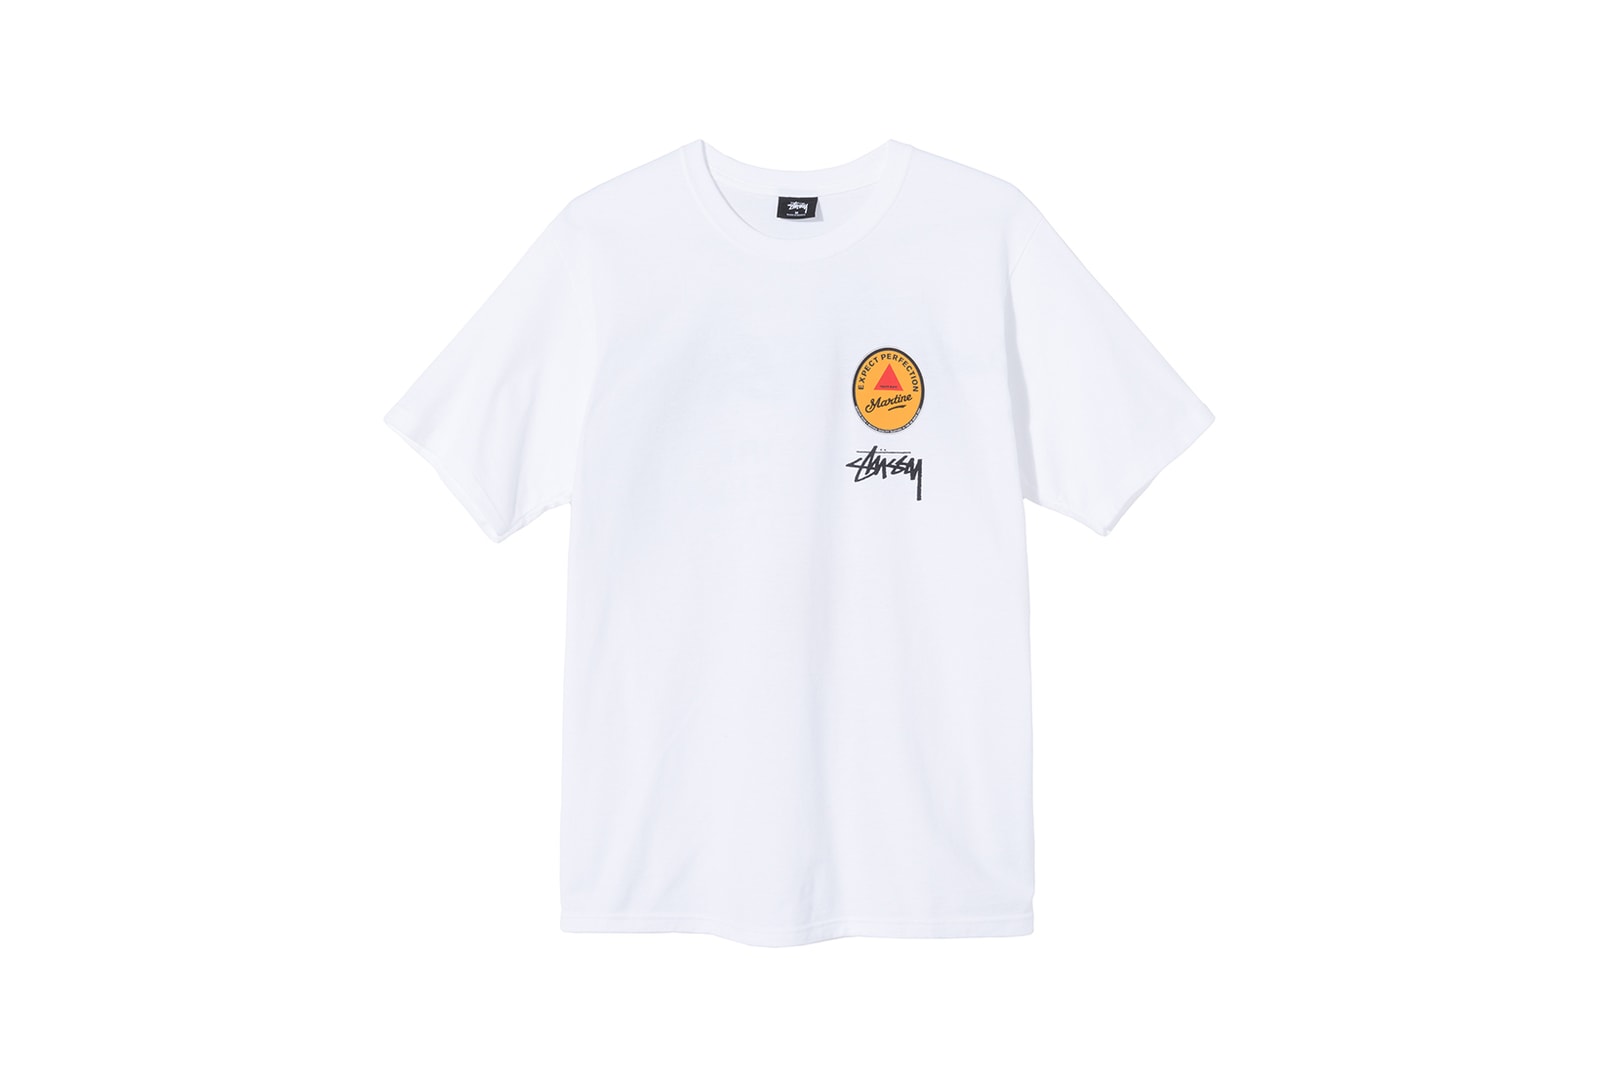 stussy 40 anniversary world tour t shirt tee collection virgil abloh marc jacobs